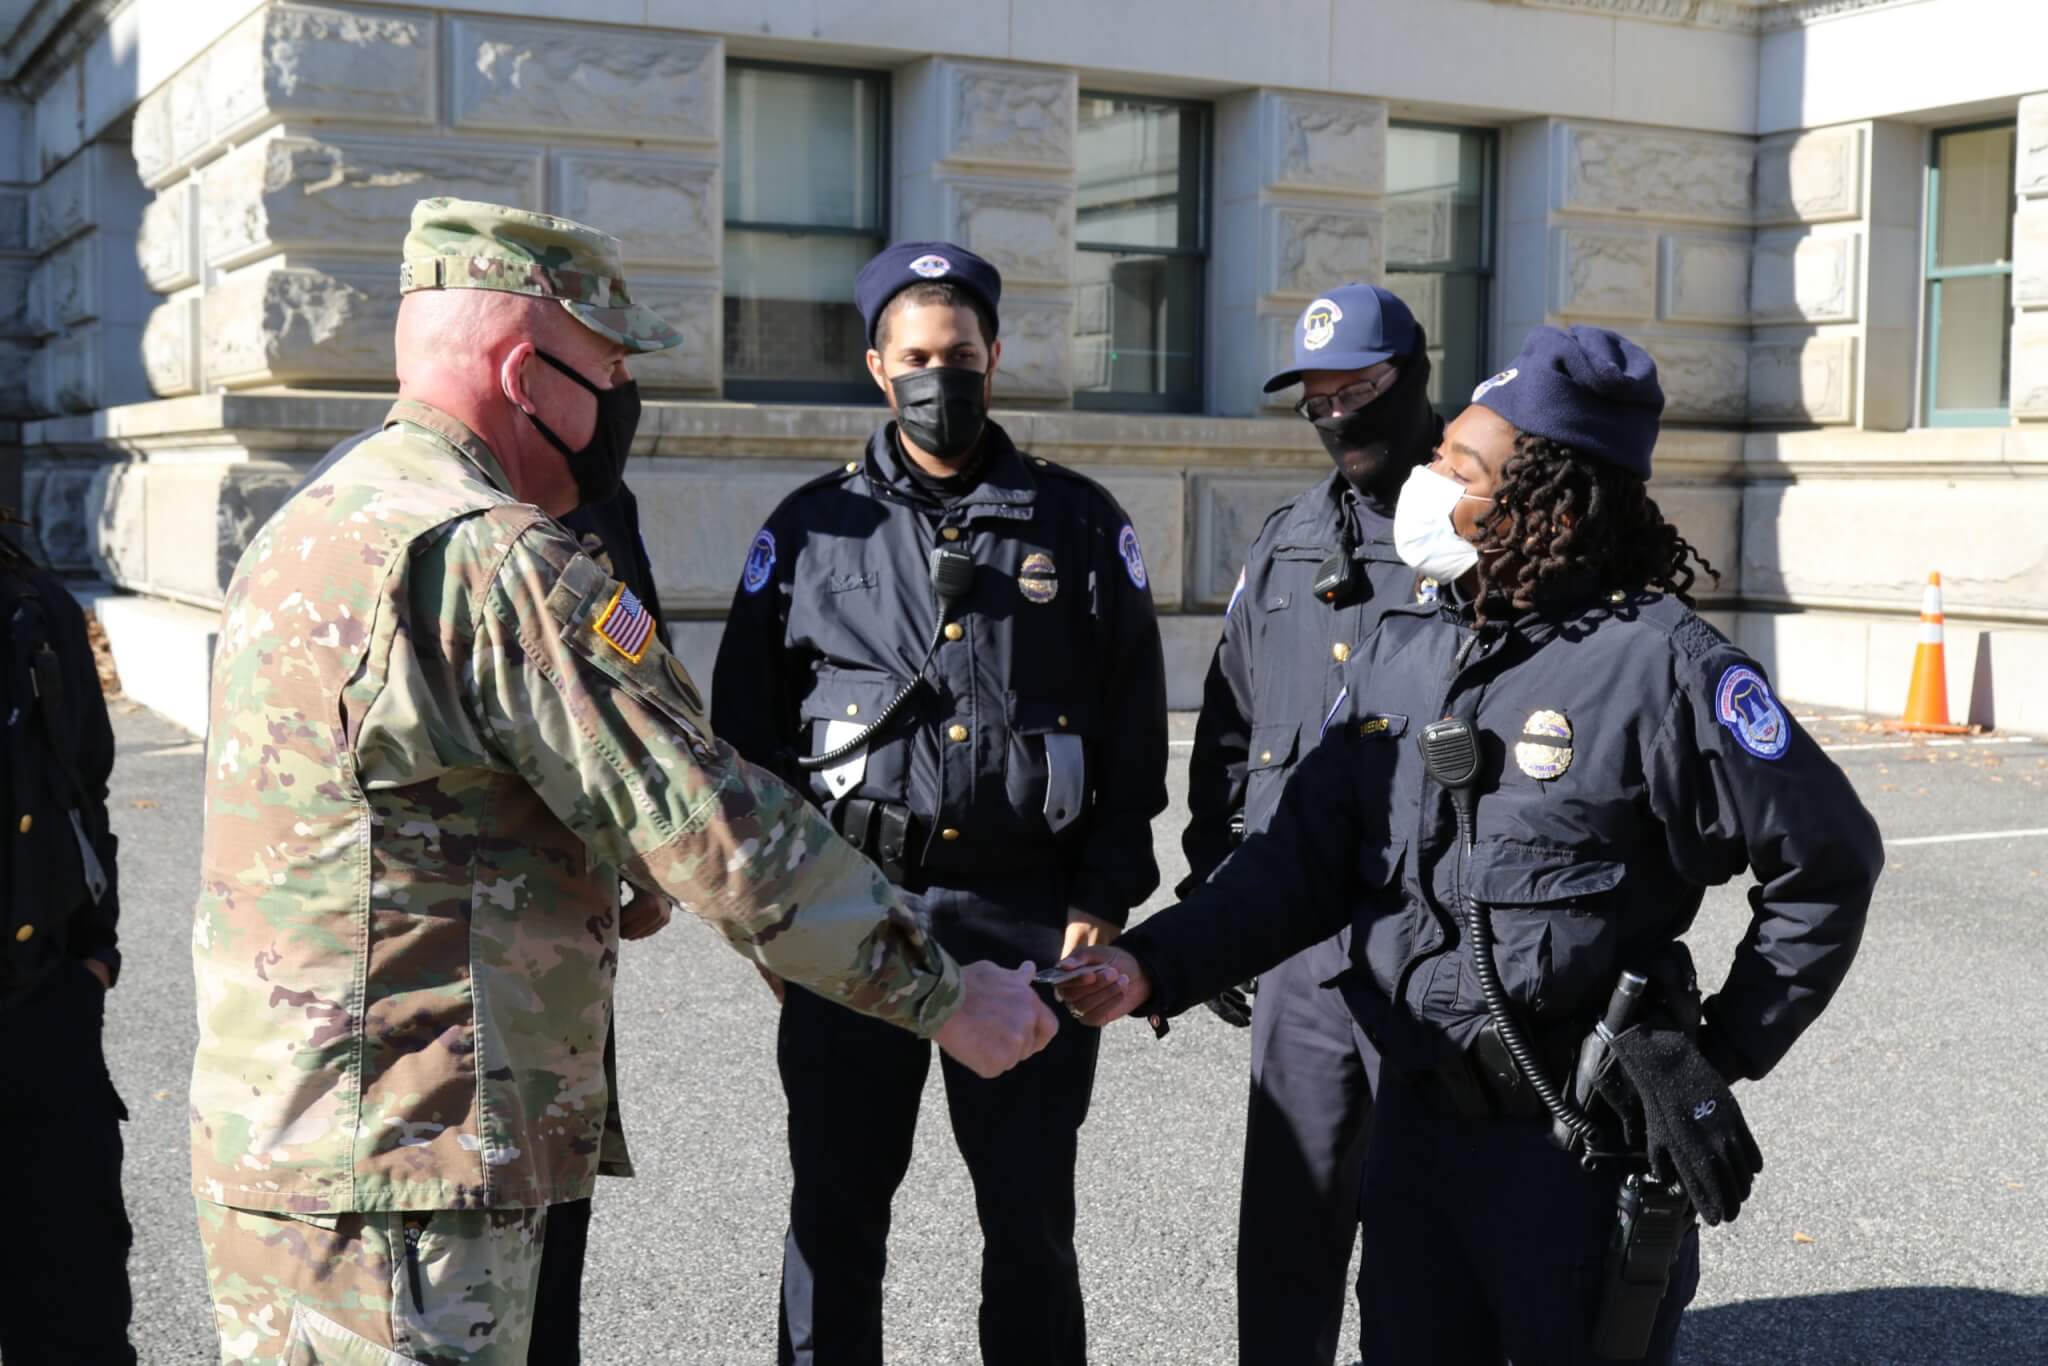 Command Sgt. Maj. Alan Ferris, the 29th Infantry Division Command Sergeant Major, speaks with United States Capitol Police officers while visiting with Virginia National Guard Soldiers assigned to the 229th Brigade Engineer Battalion, 116th Infantry Brigade Combat Team Jan. 10, 2021, in Washington D.C.  National Guard Soldiers and Airmen from several states have traveled to the National Capital Region to provide support to federal and district authorities leading up to the 59th Presidential Inauguration. (U.S. Army National Guard photo by Sgt. Marc Heaton)